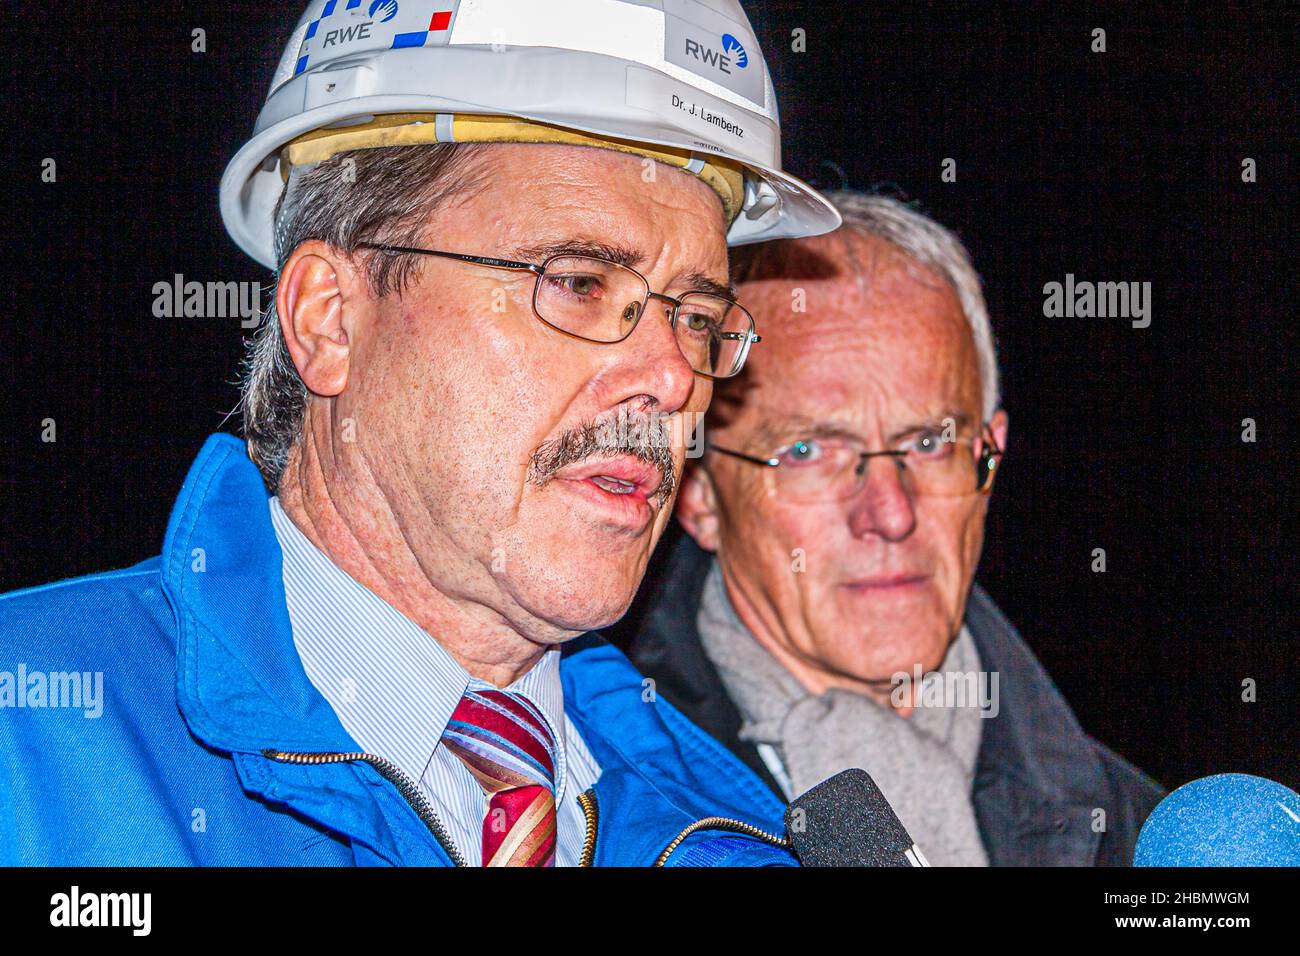 News Interwiew with Dr. J.Lambertz and Jürgen Rüttgers during an accident at the BOA construction site of the Neurath power plant, Grevenbroich, Germany Stock Photo